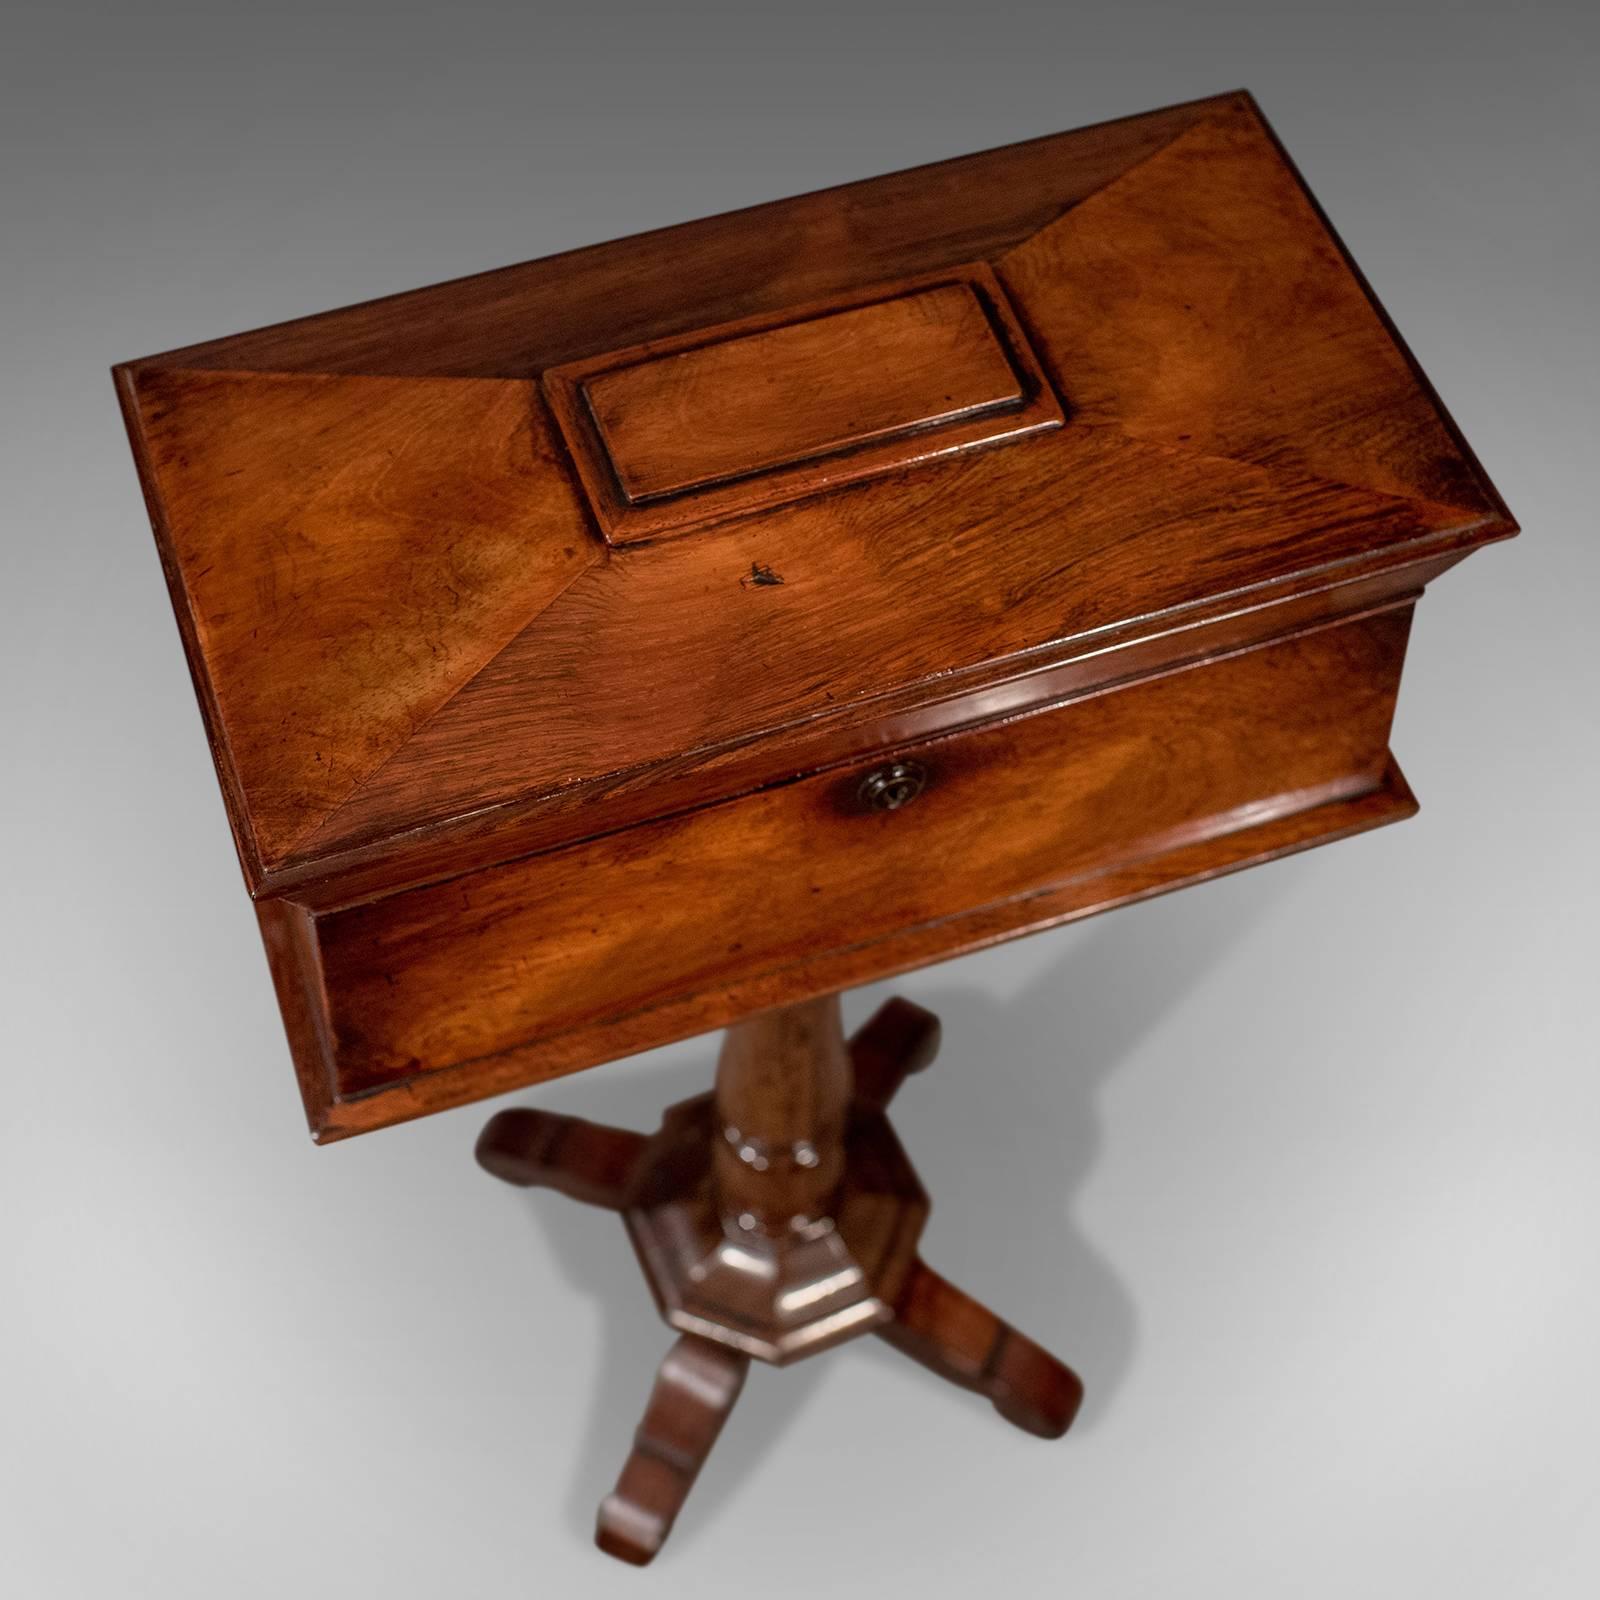 Early 19th Century Antique English Regency Tea Poy Caddy on Stand Fine Rosewood, circa 1820